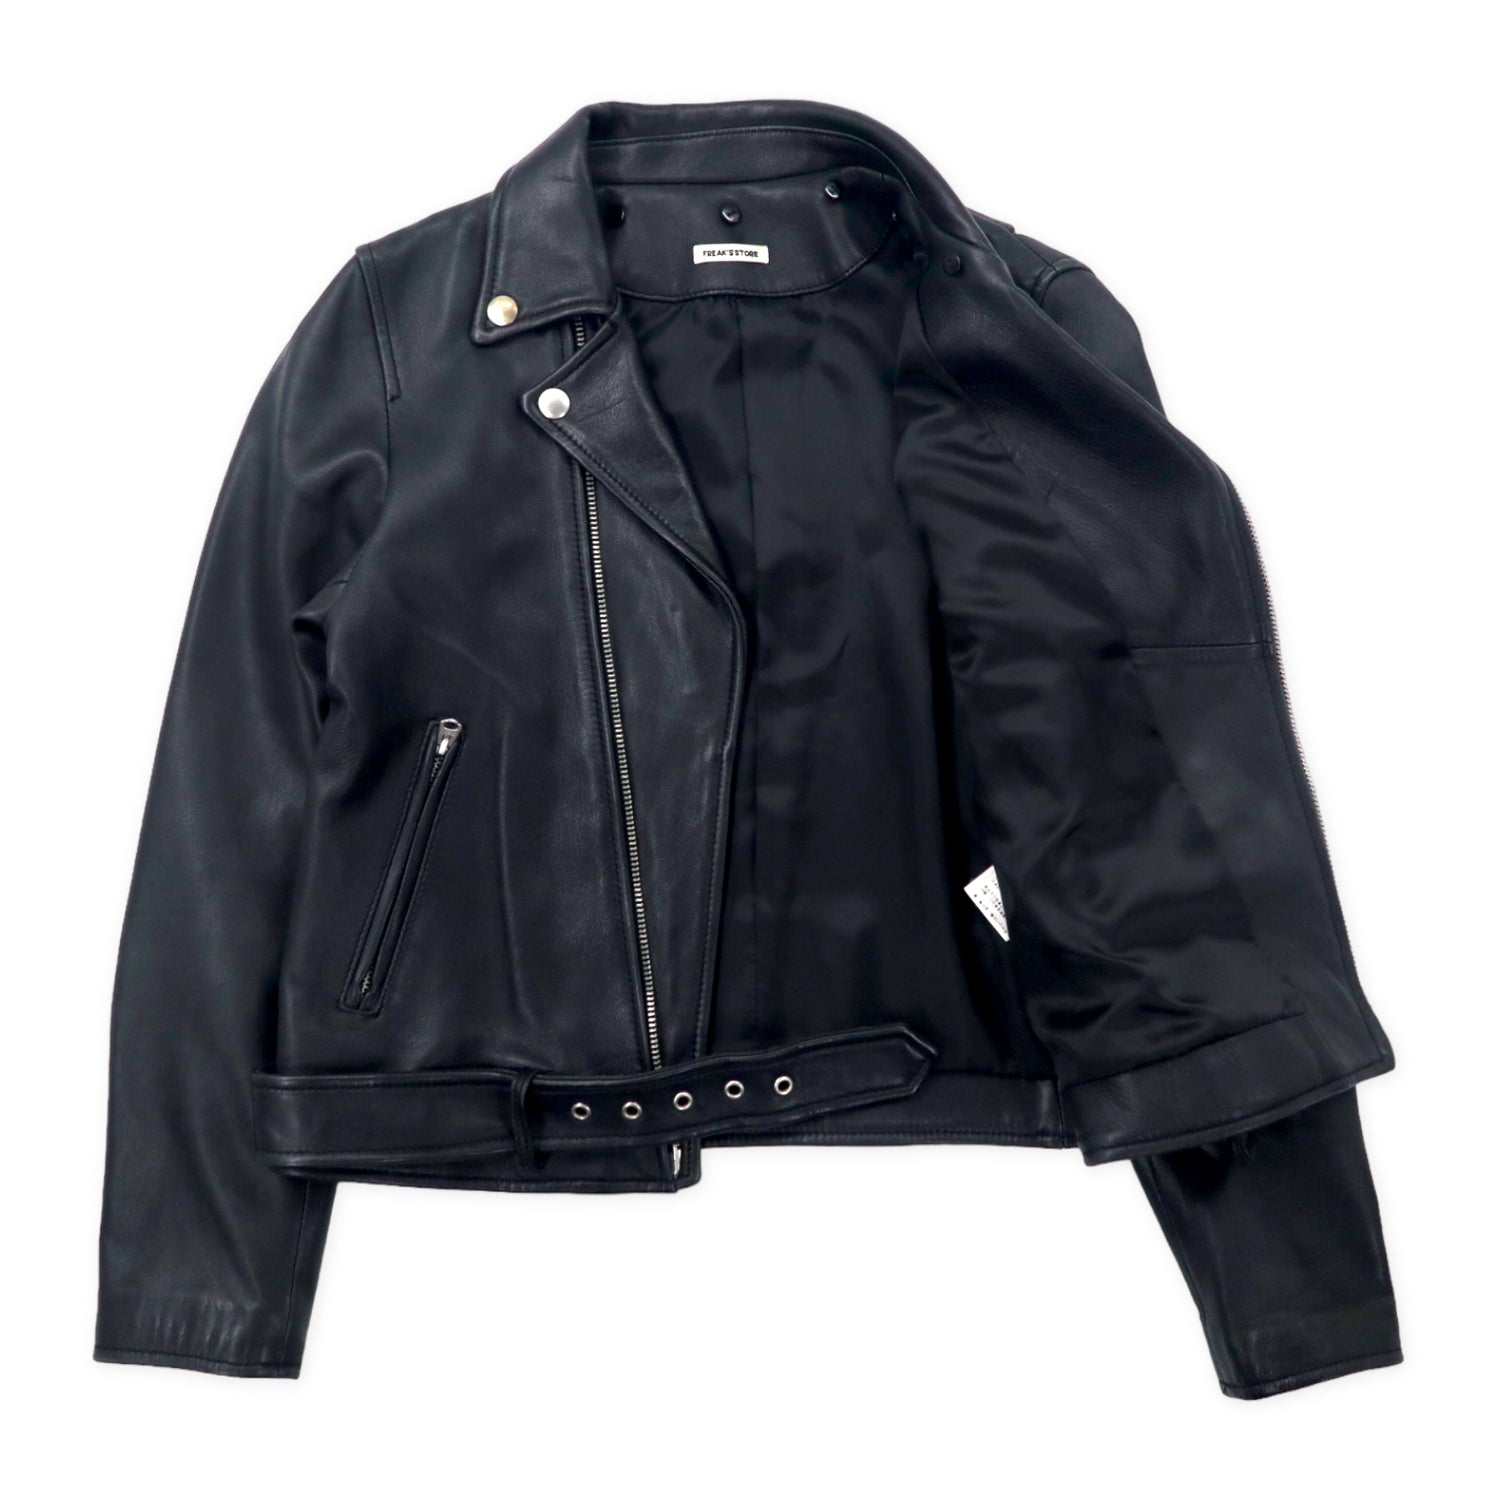 FREAK'S STORE Double Riders Jacket S Black sheep leather 